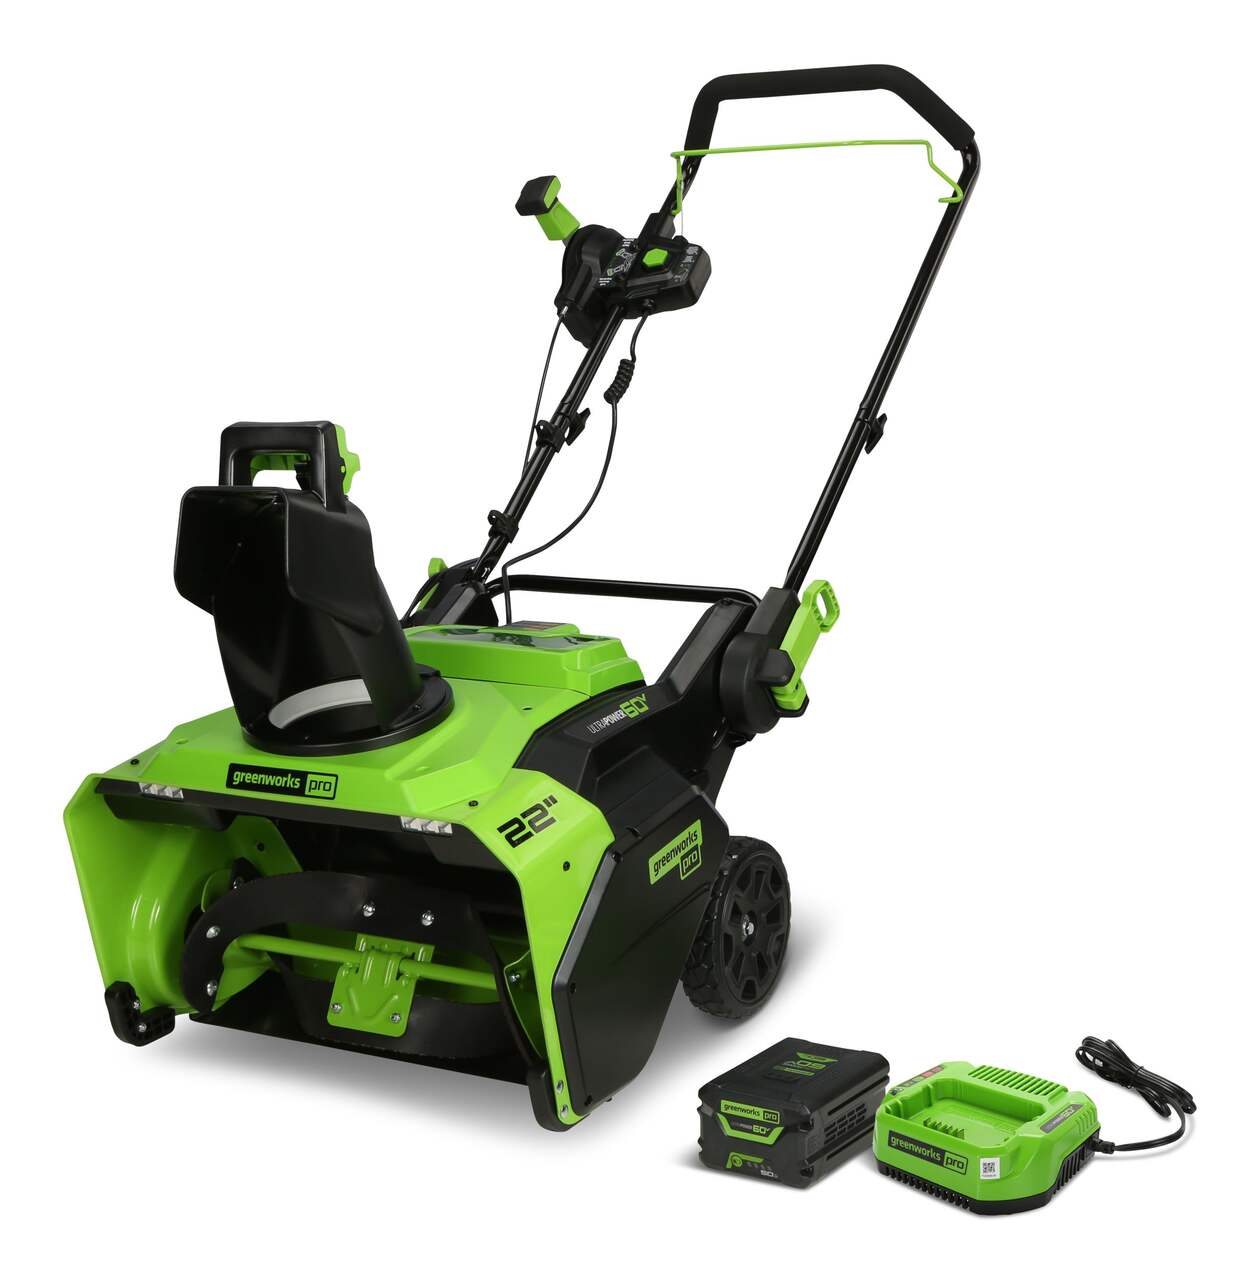 https://media-www.canadiantire.ca/product/seasonal-gardening/outdoor-tools/snowblowers/0604032/greenworks-60v-1-5ah-single-stage-cordless-snowblower-22--94a89d31-7a77-40dd-b51c-04e097609462-jpgrendition.jpg?imdensity=1&imwidth=1244&impolicy=mZoom